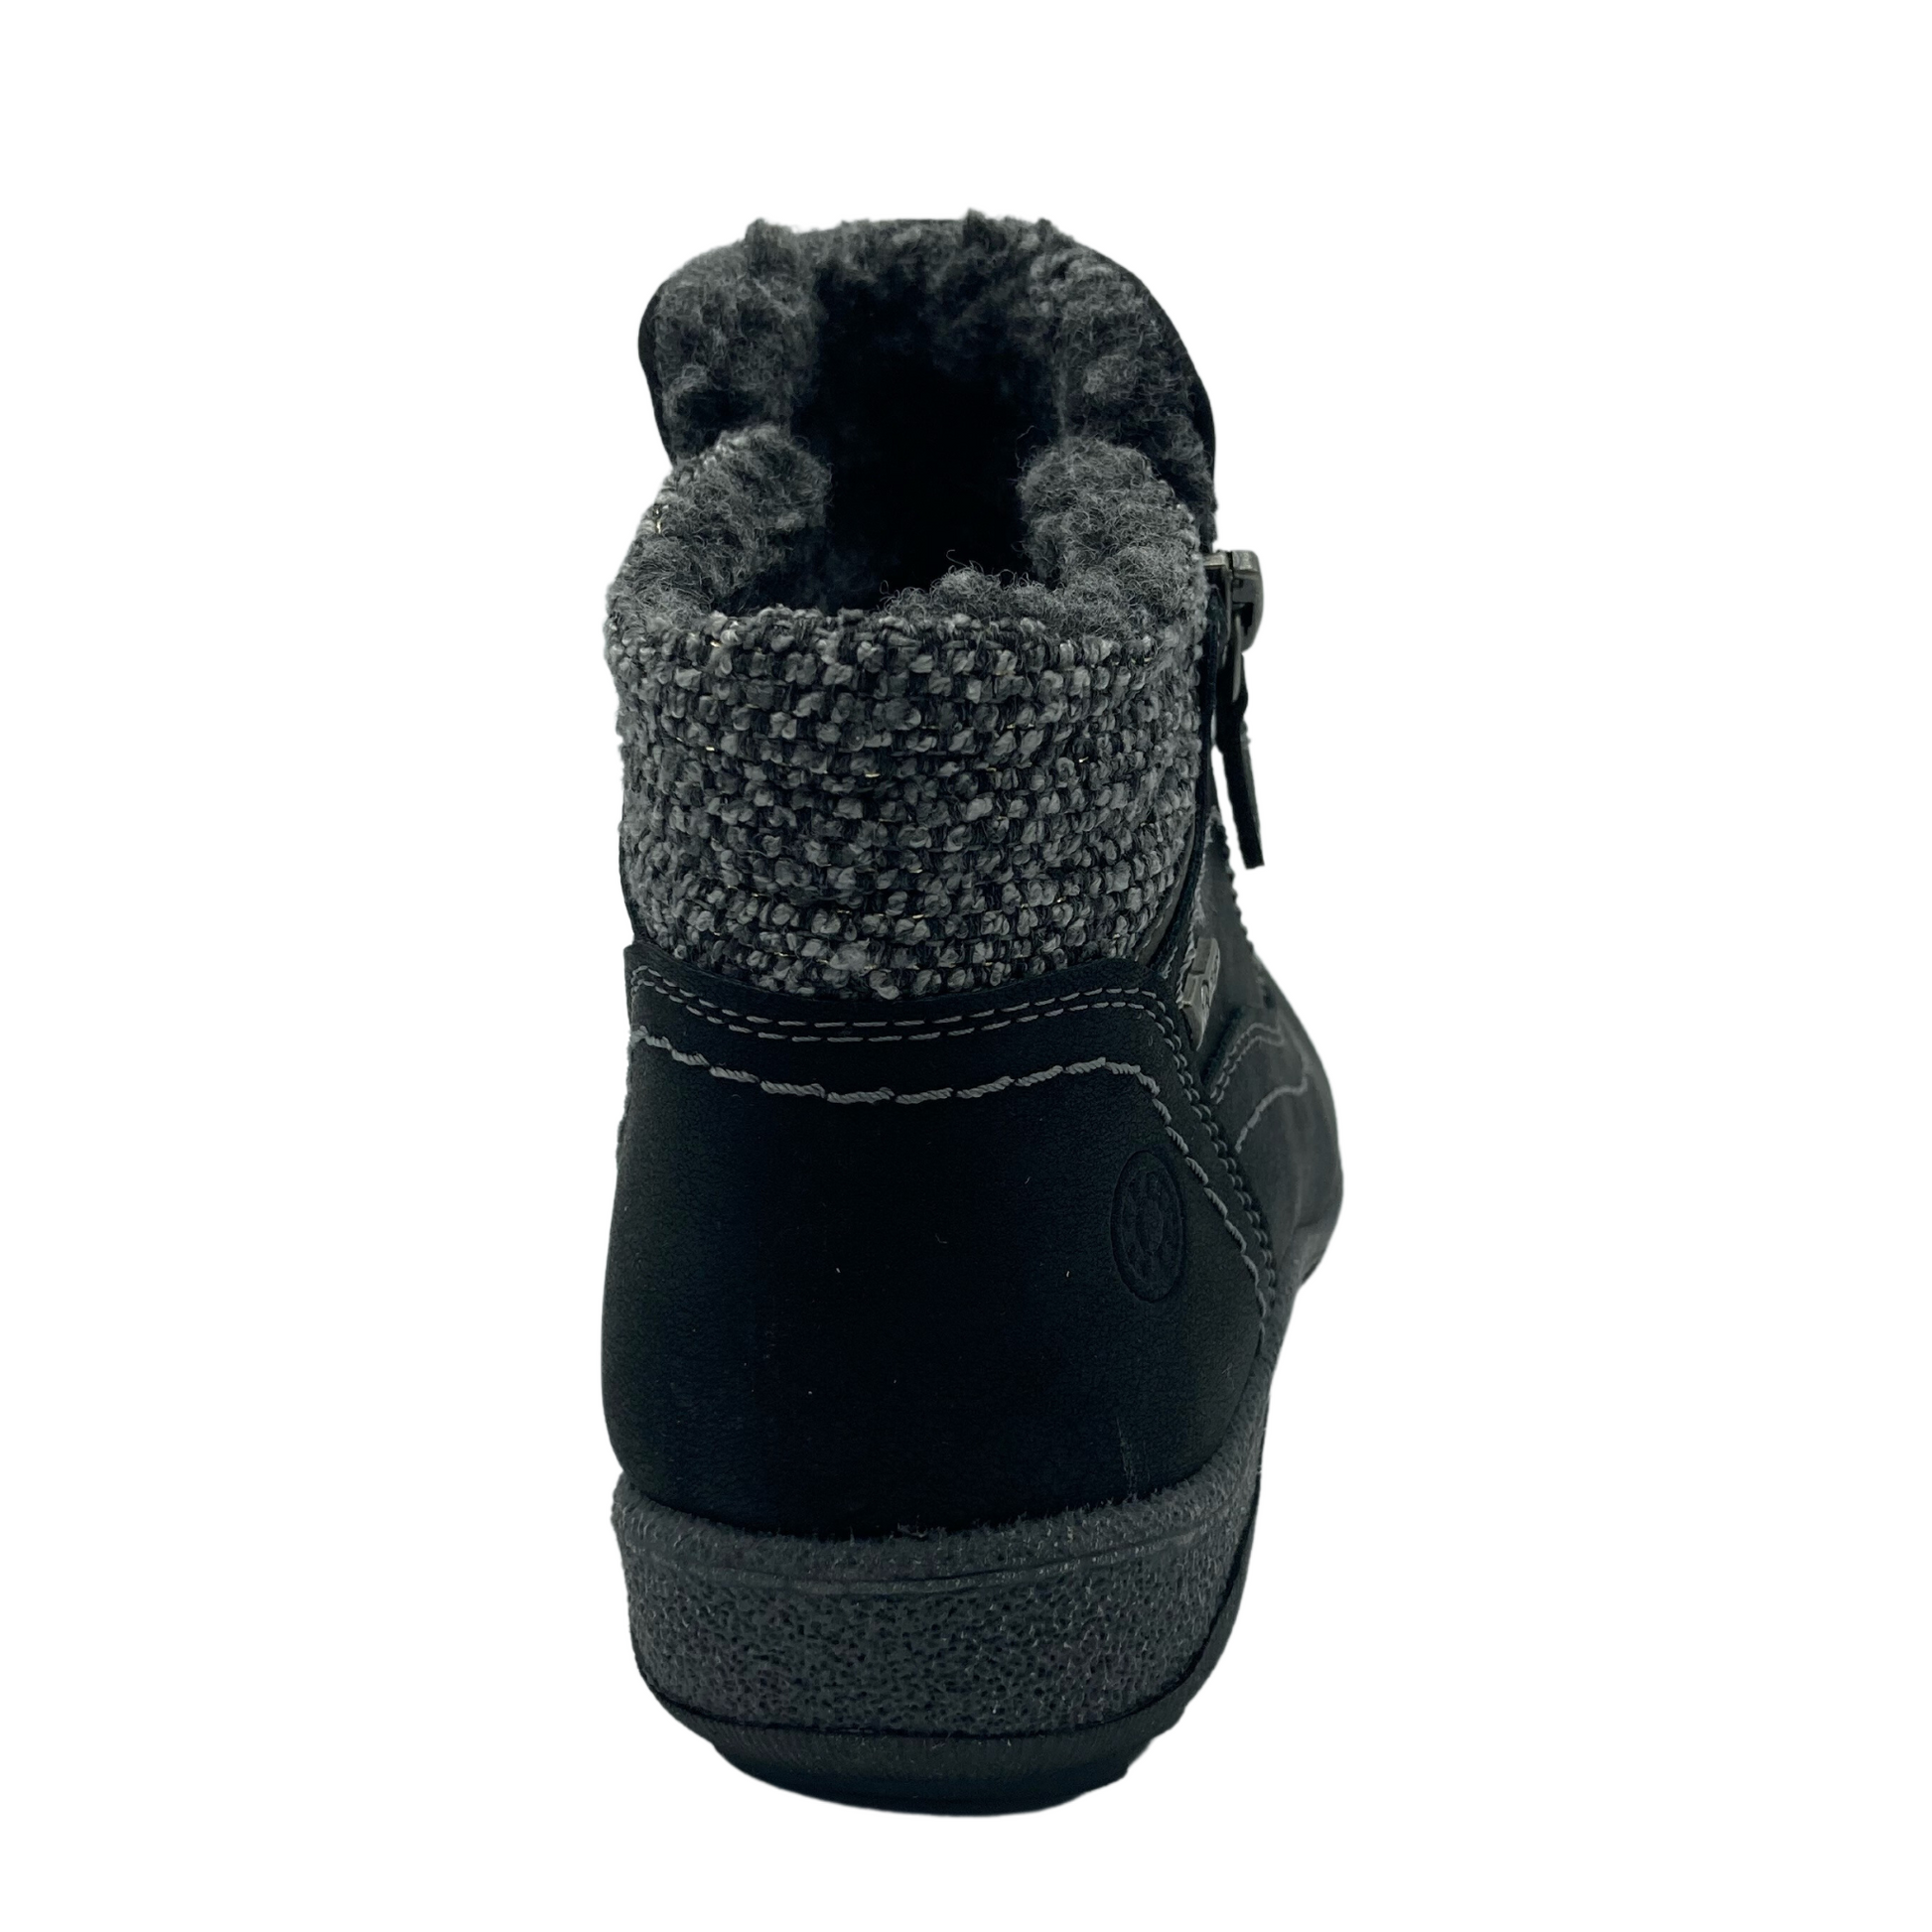 Heel view of back of faux suede ankle bootie with insulated inner lining and rubber outsole